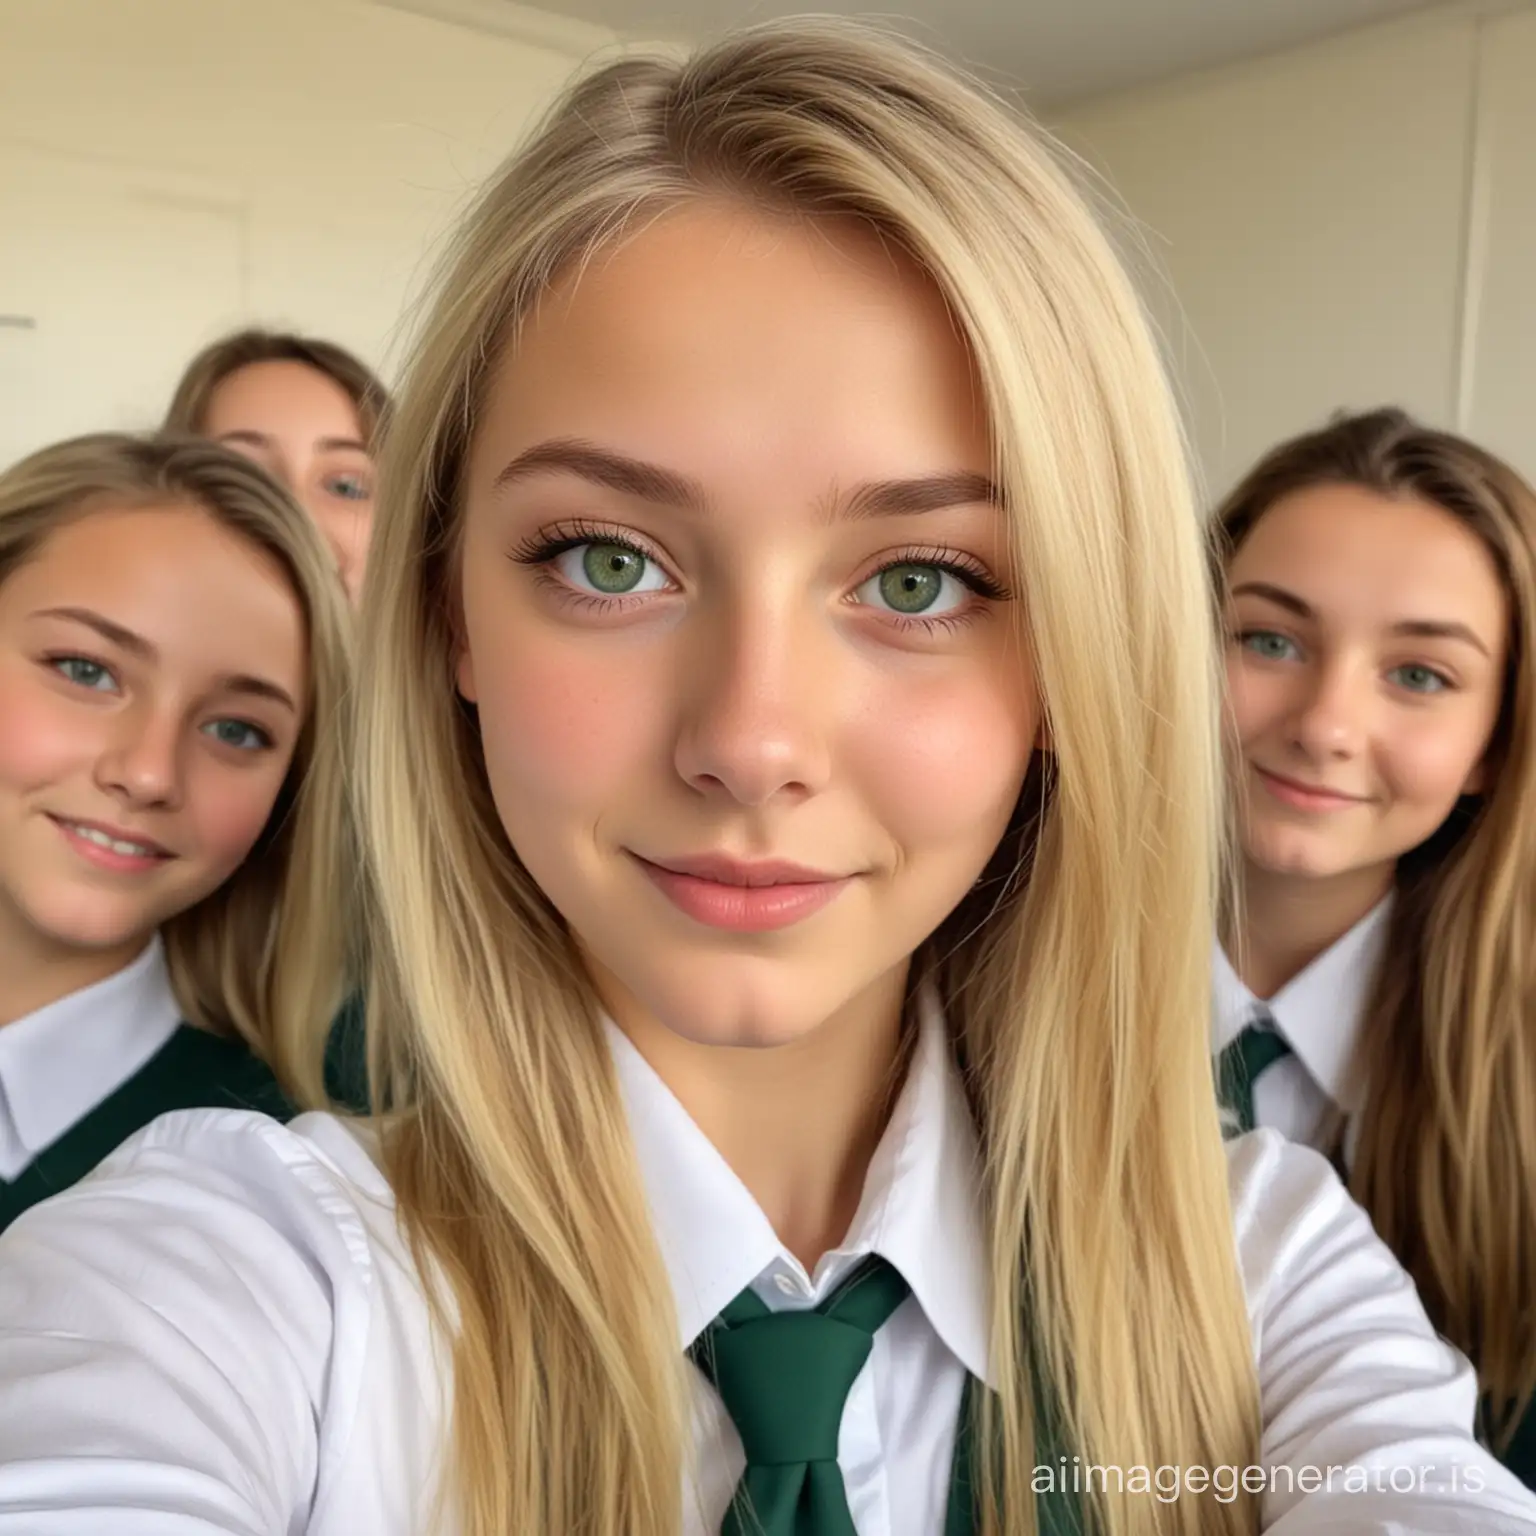 female, 14 years old, blonde hair, green eyes, taking selfie, full body, in class with other people, wearing school uniform